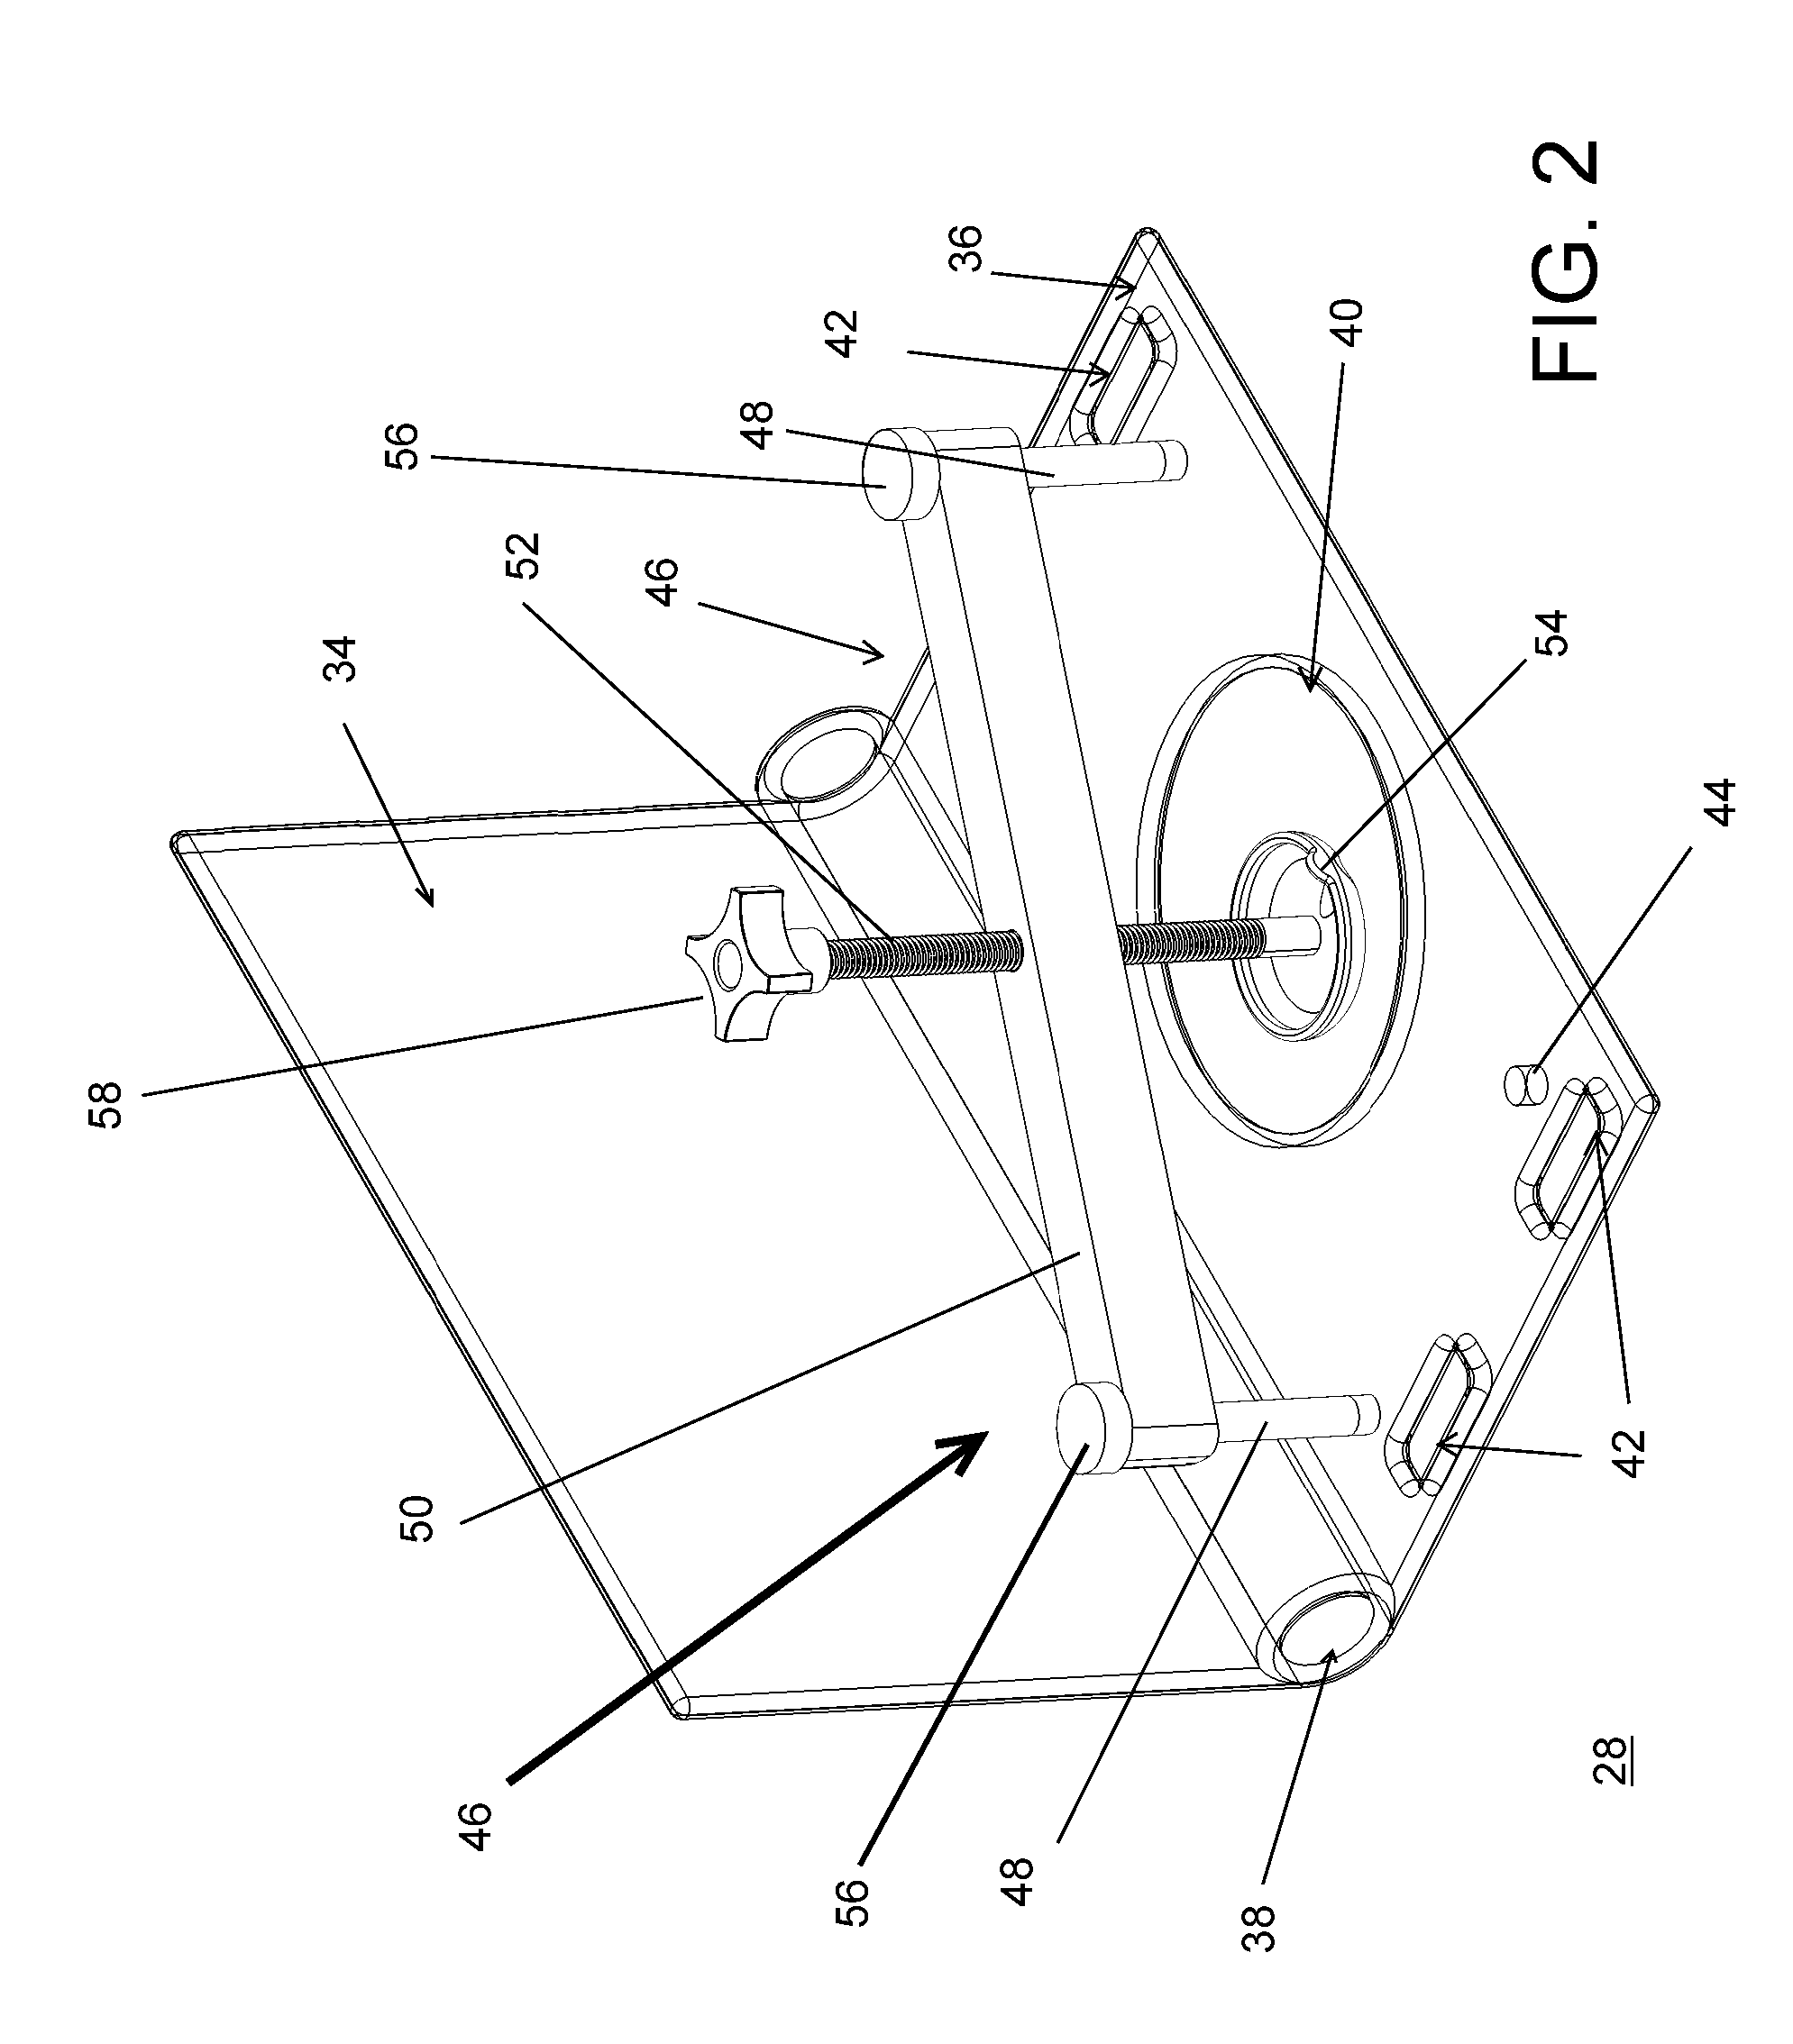 Method and apparatus for retraction of pannus